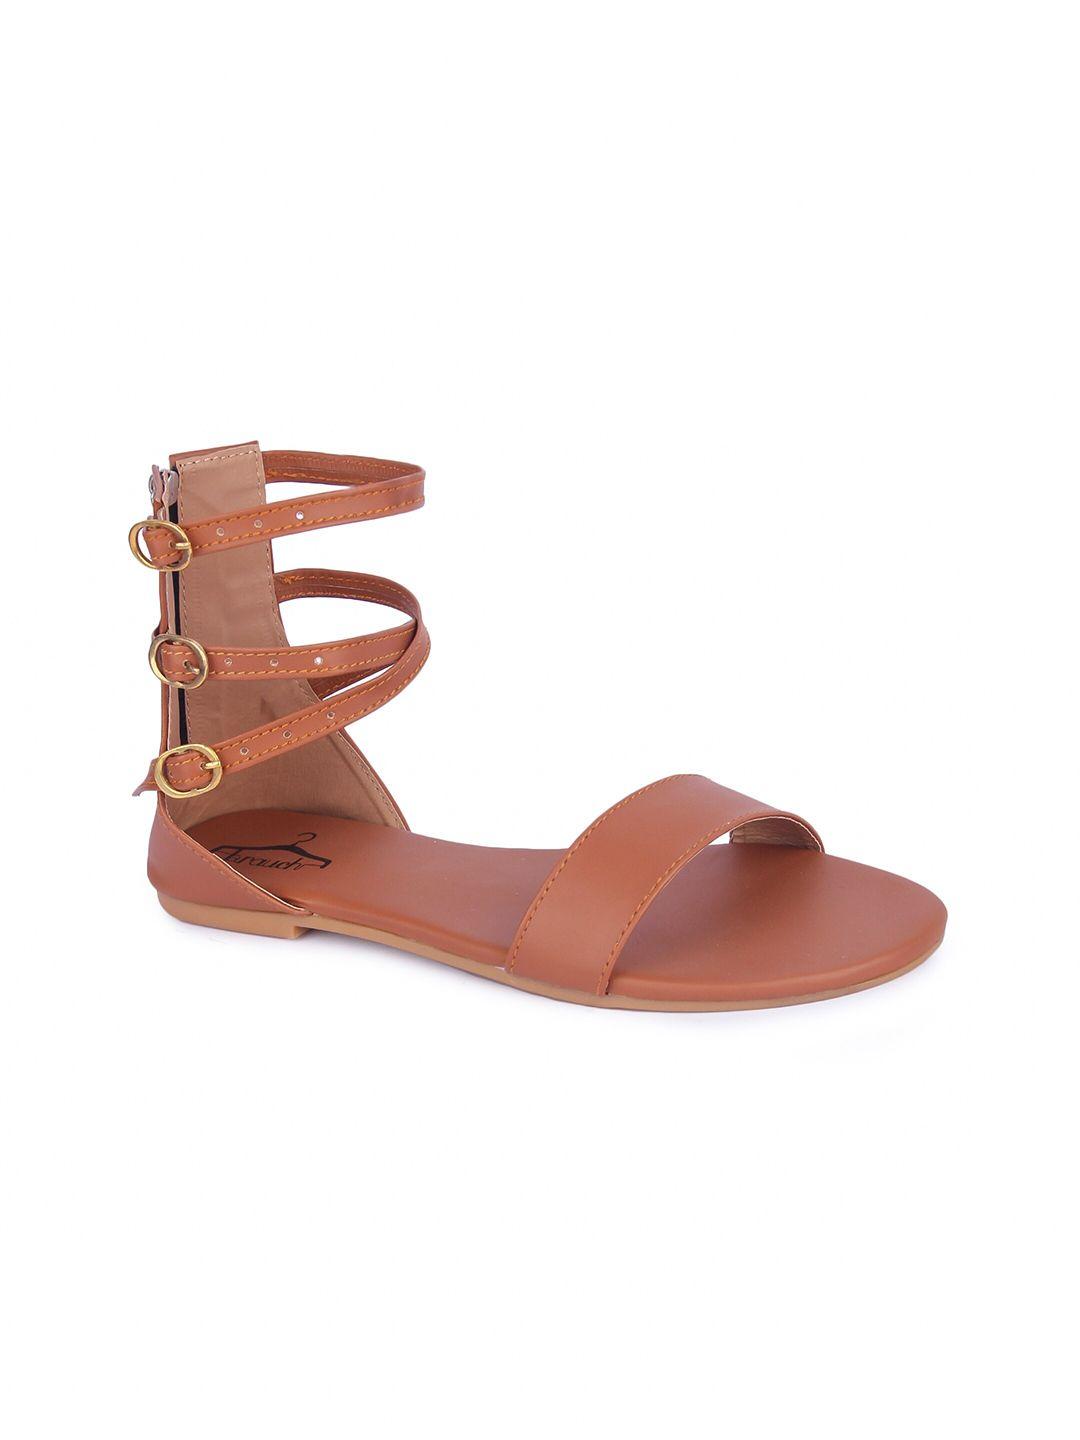 brauch women brown gladiators with buckles flats